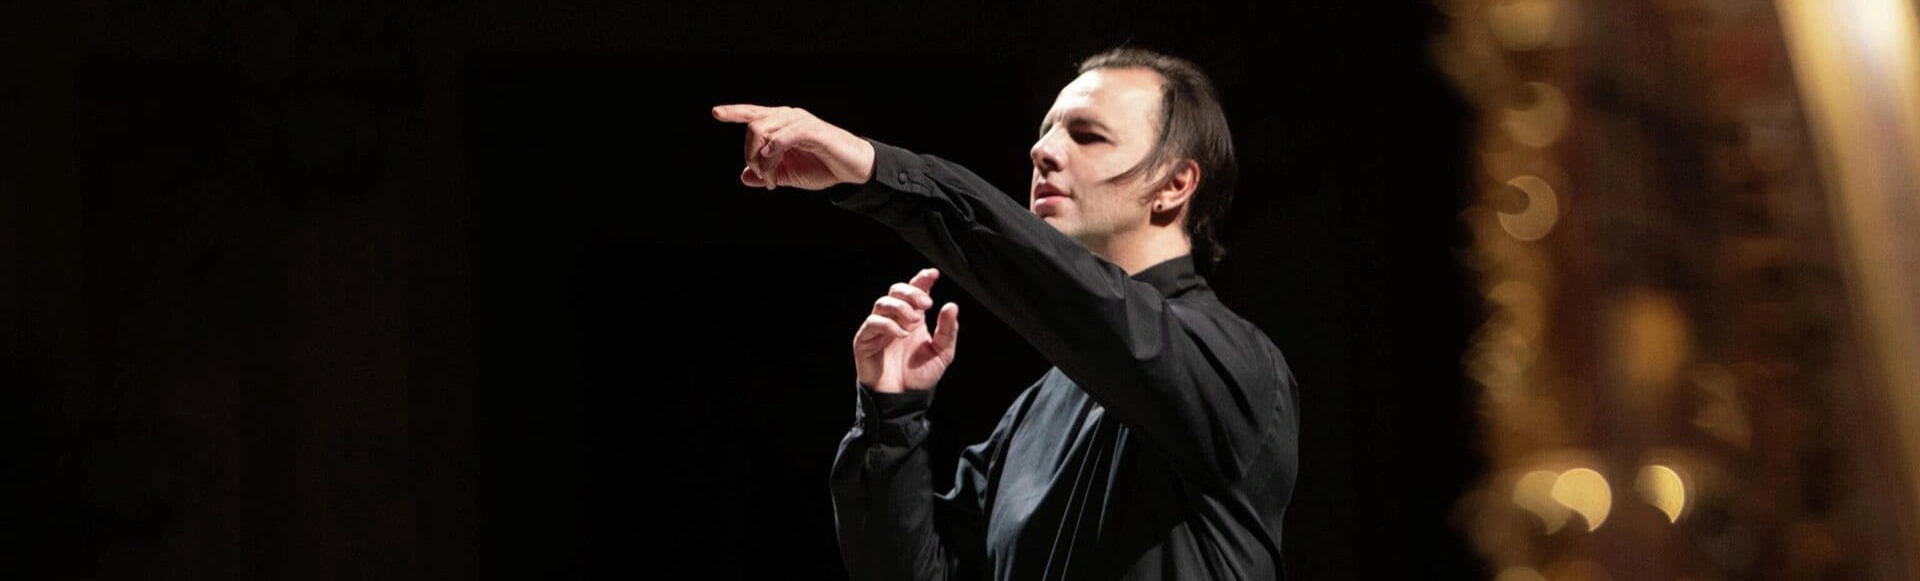 SWR Symphony Orchestra. Teodor Currentzis (conductor). Wagner